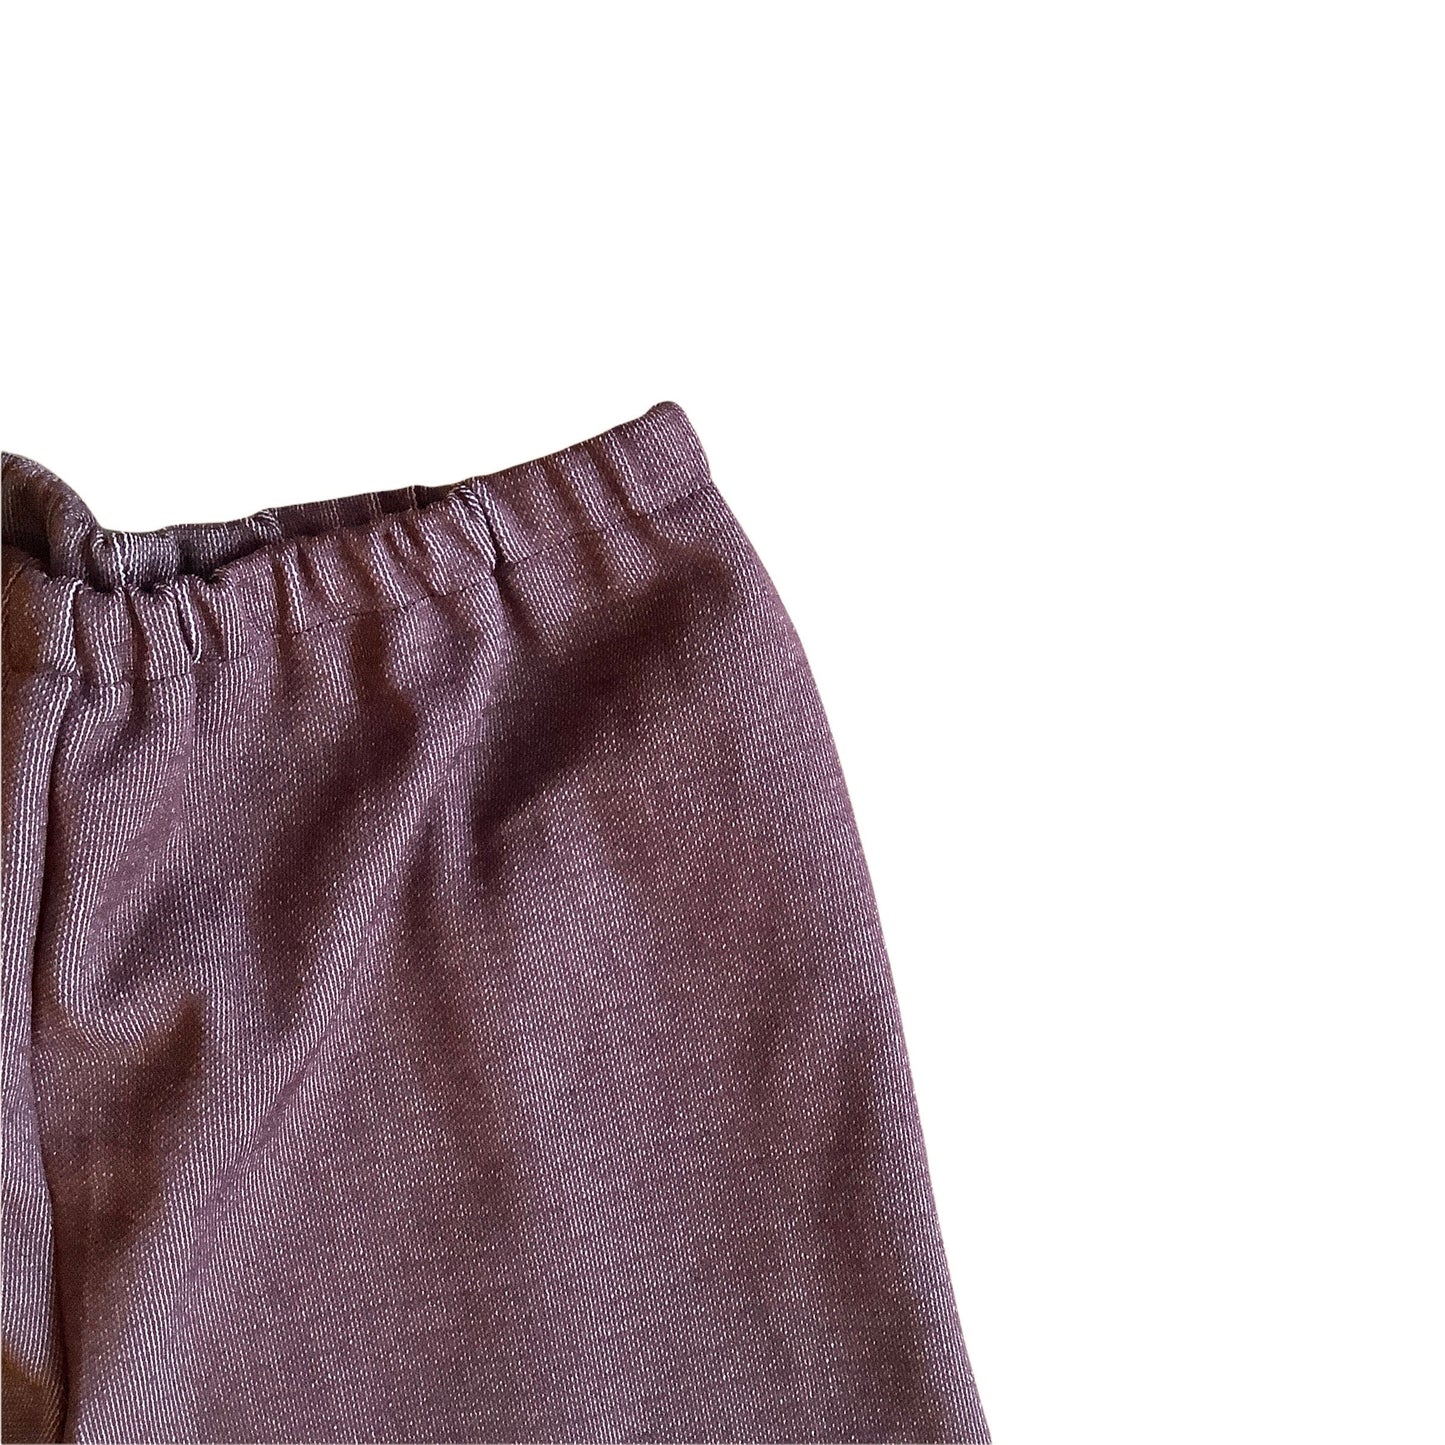 Vintage 1960's Brown Shorts French Made 4-5 Years